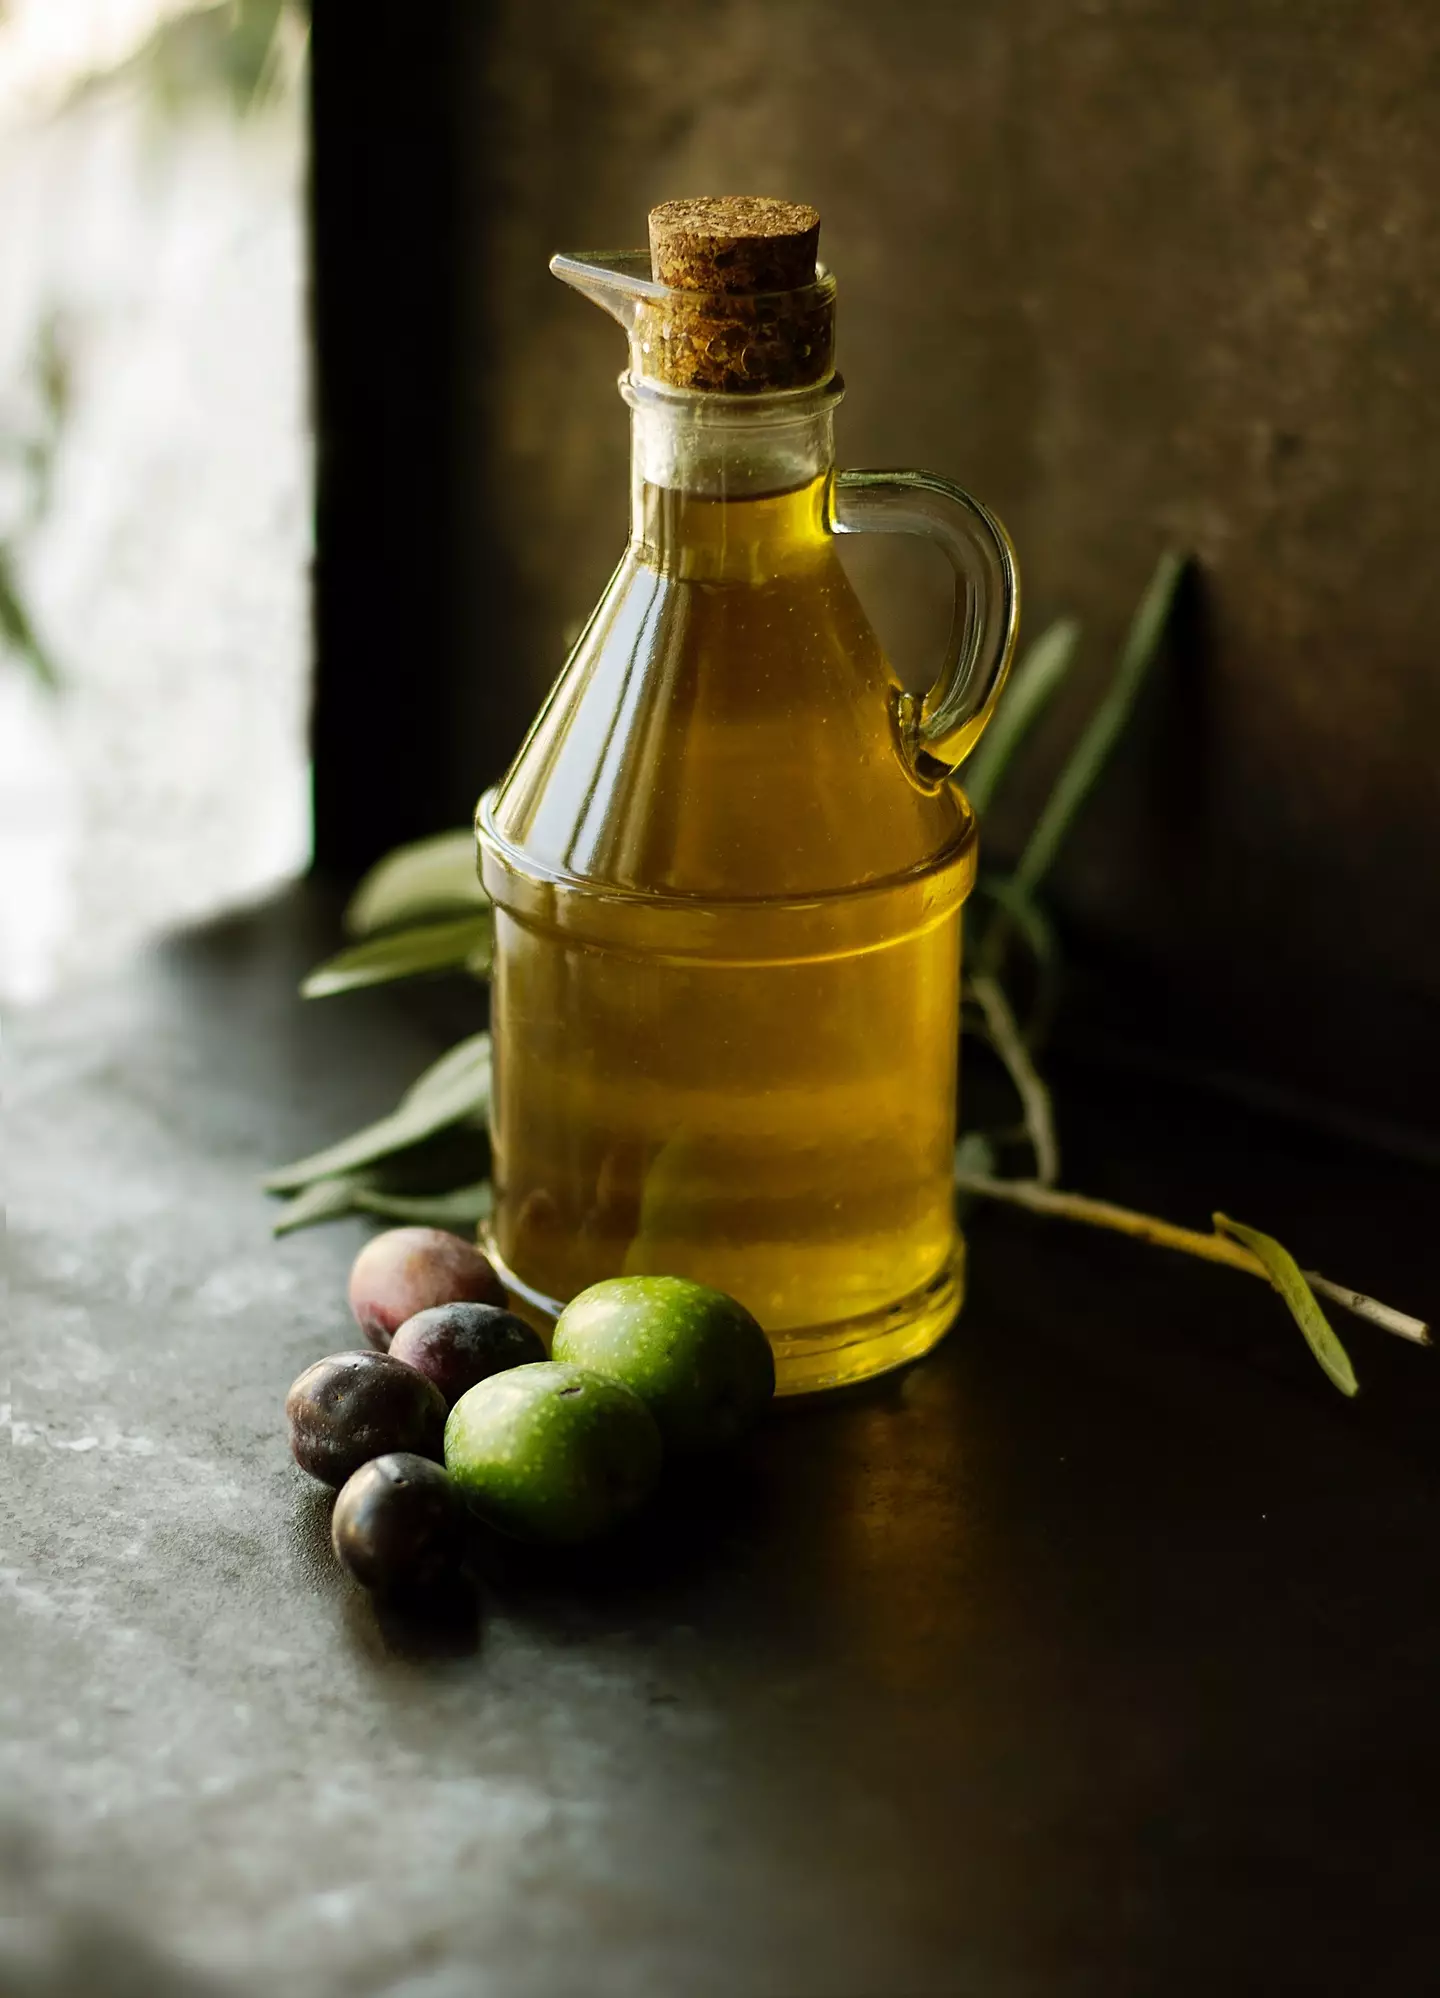 Extra virgin olive oil helps with tearing according to experts (